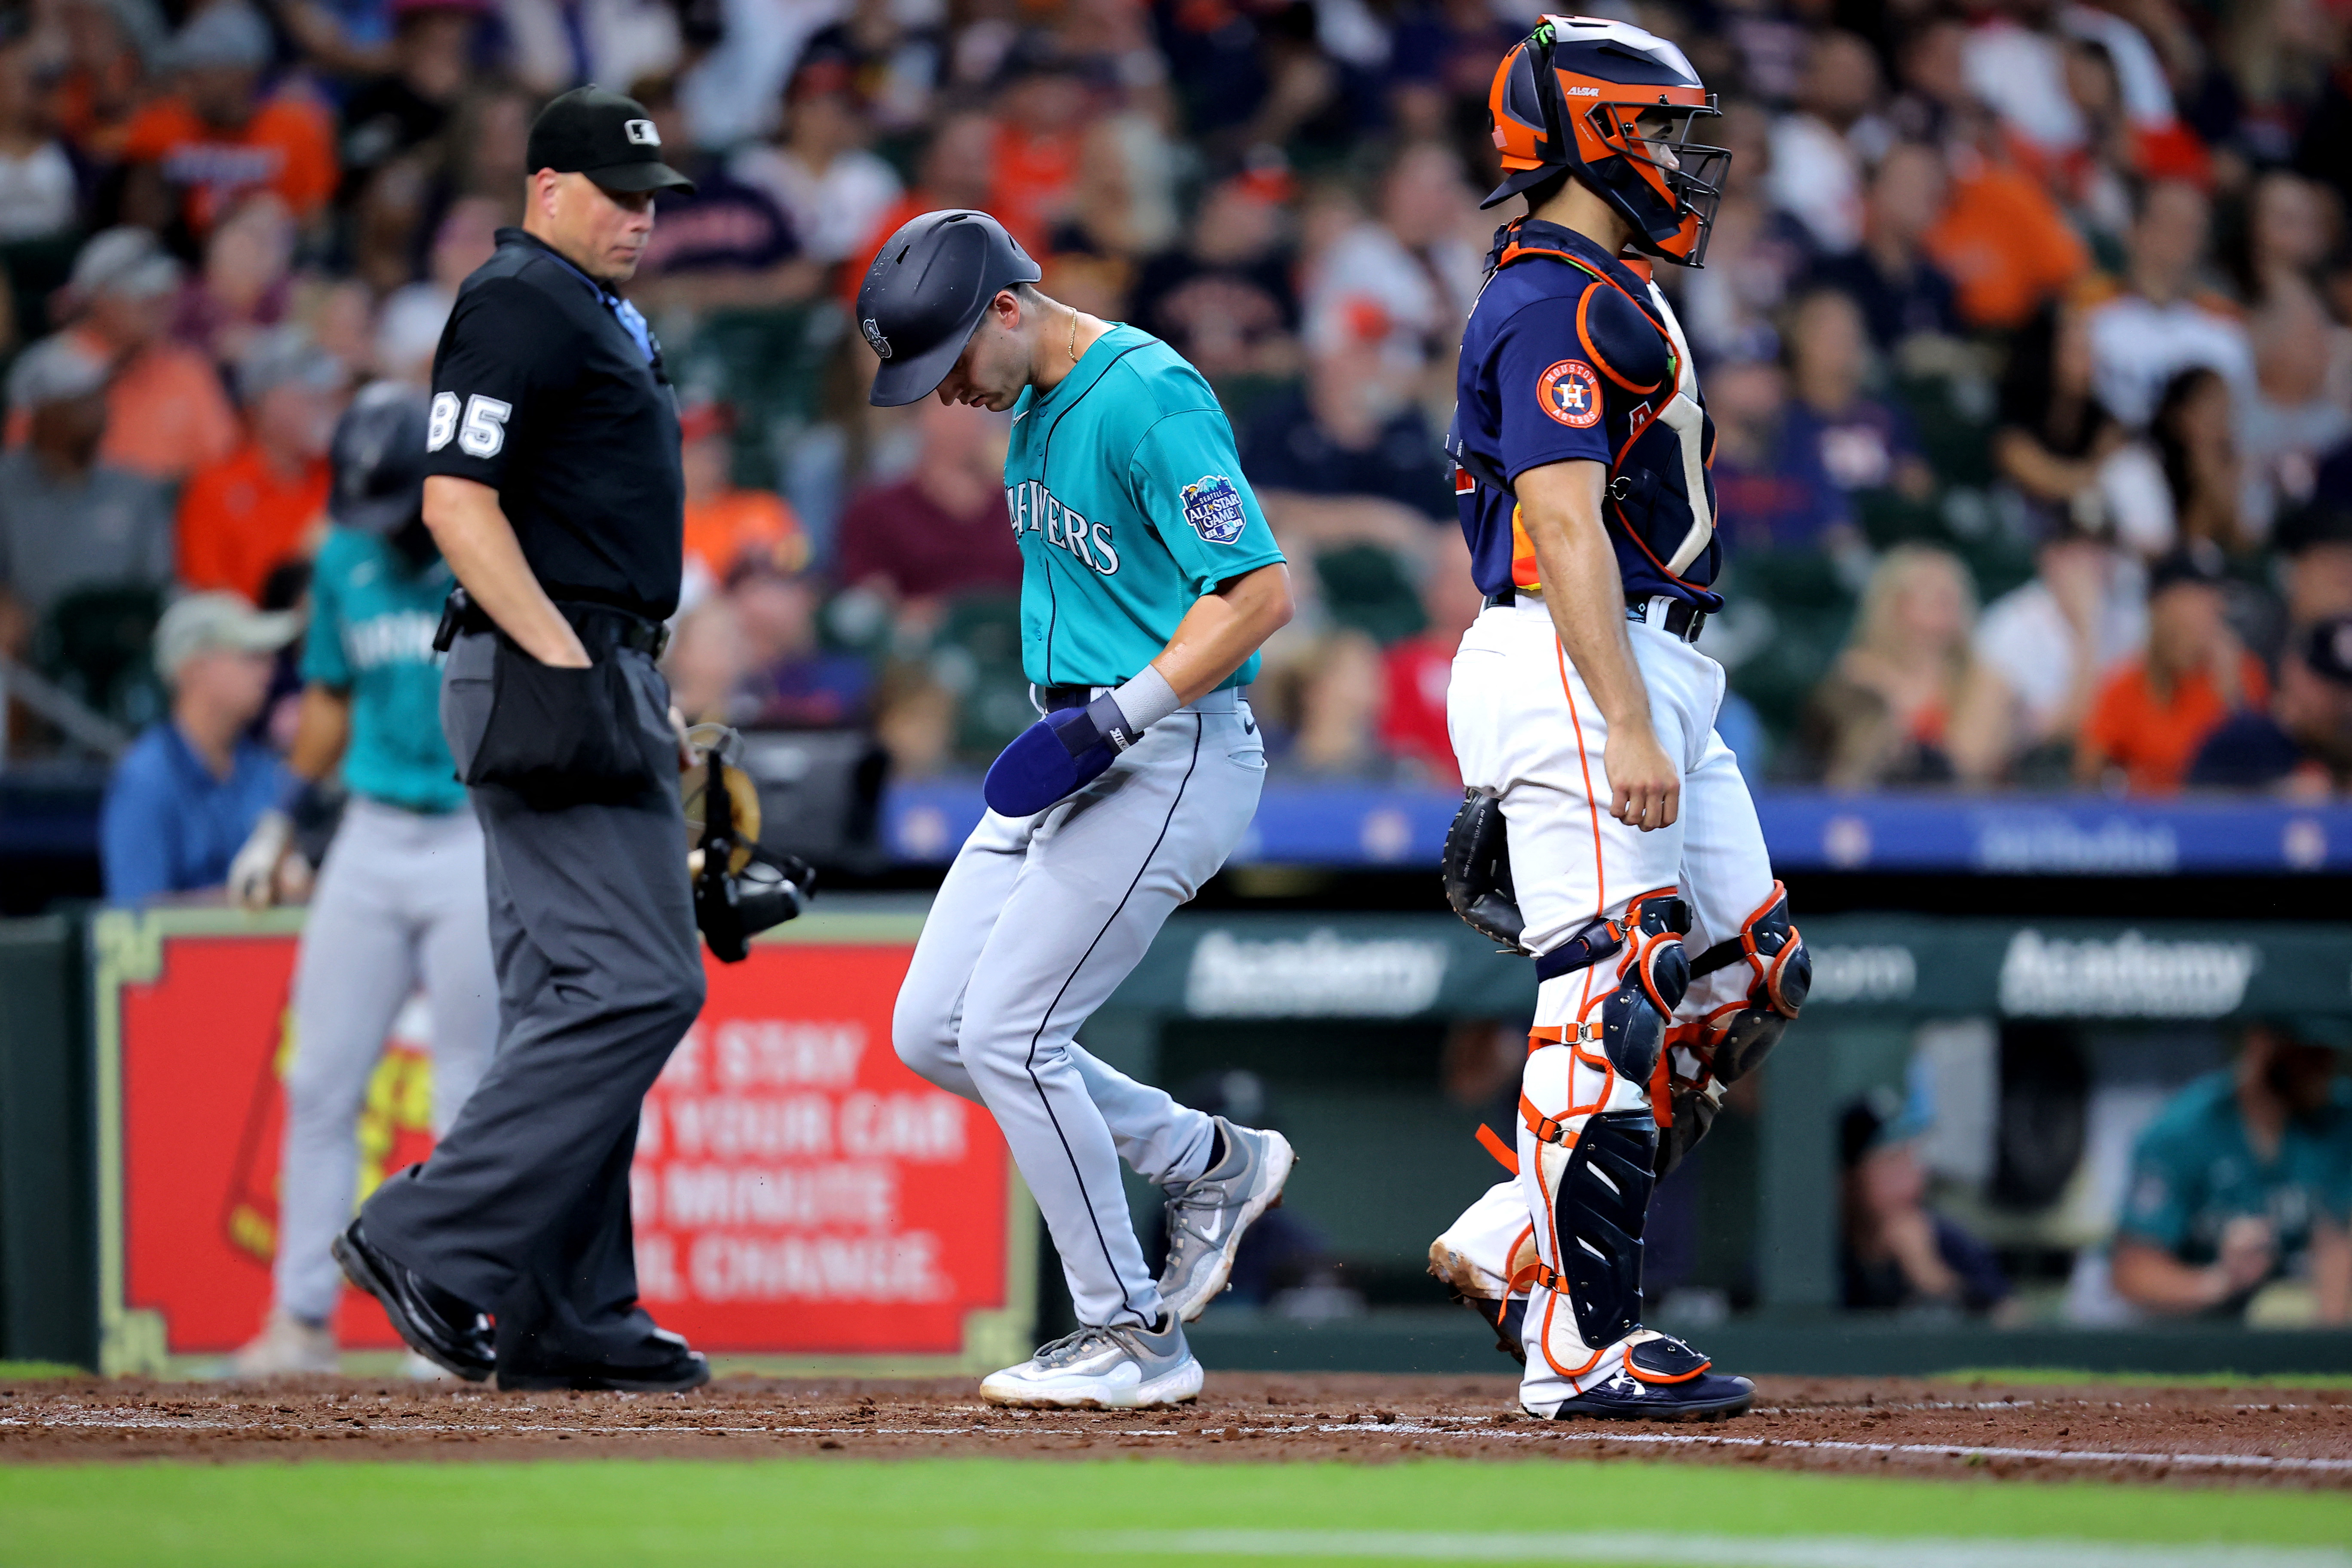 Mariners complete sweep of Astros to tighten wild-card race